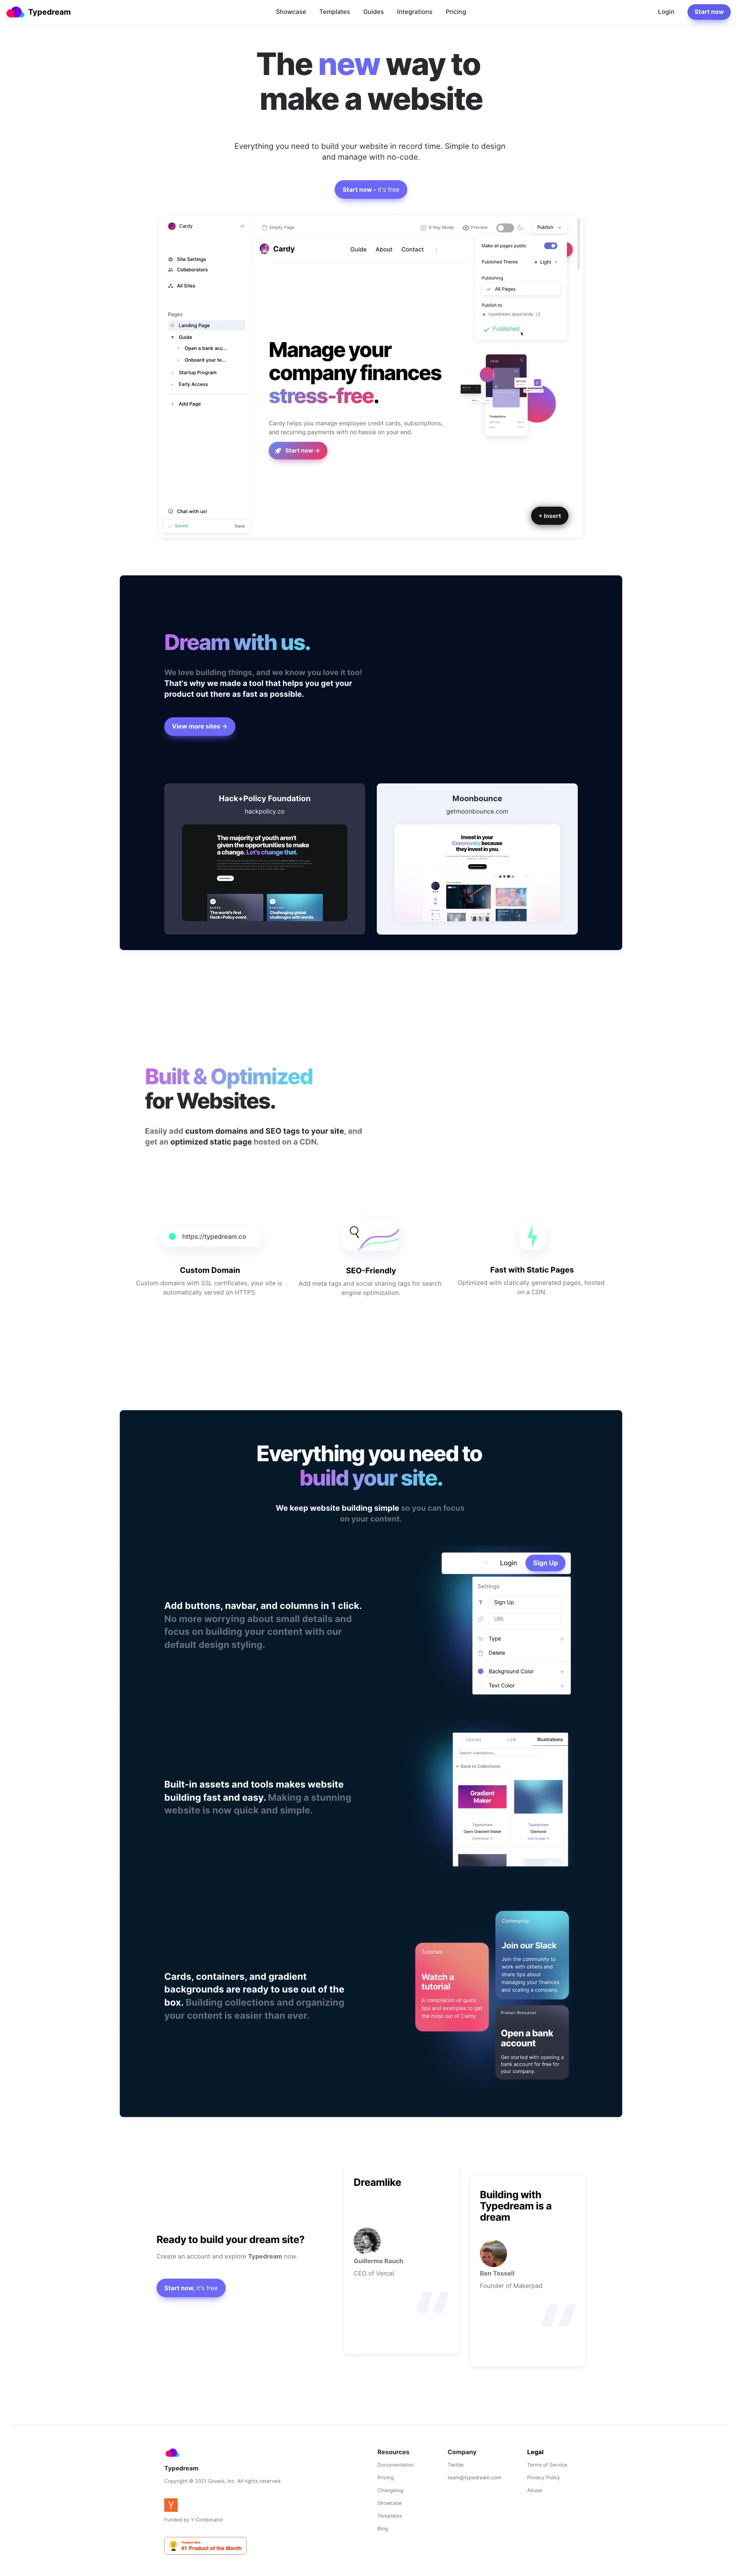 Typedream Landing Page Example: The new way to make a website. Everything you need to build your website in record time. Simple to design and manage with no-code.